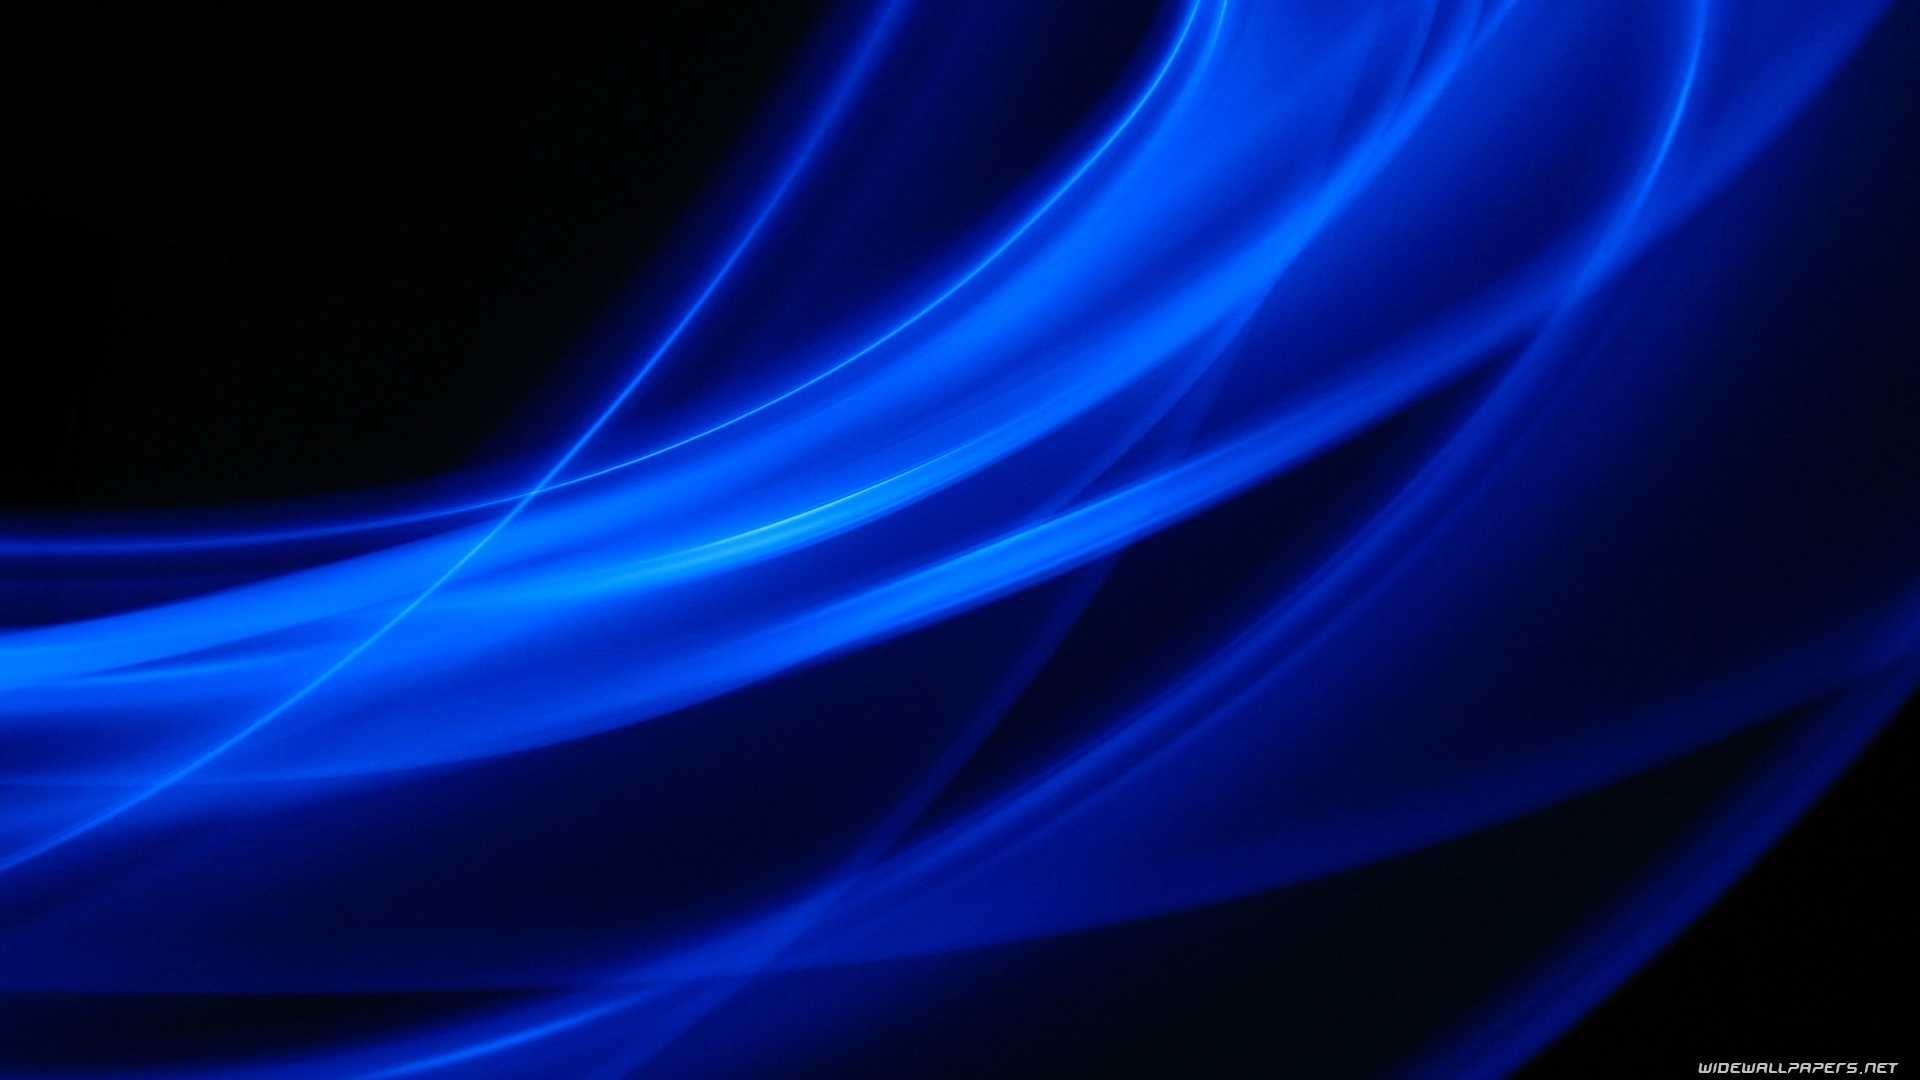 Black And Blue Abstract Widescreen HD Wallpaper Image For Androids